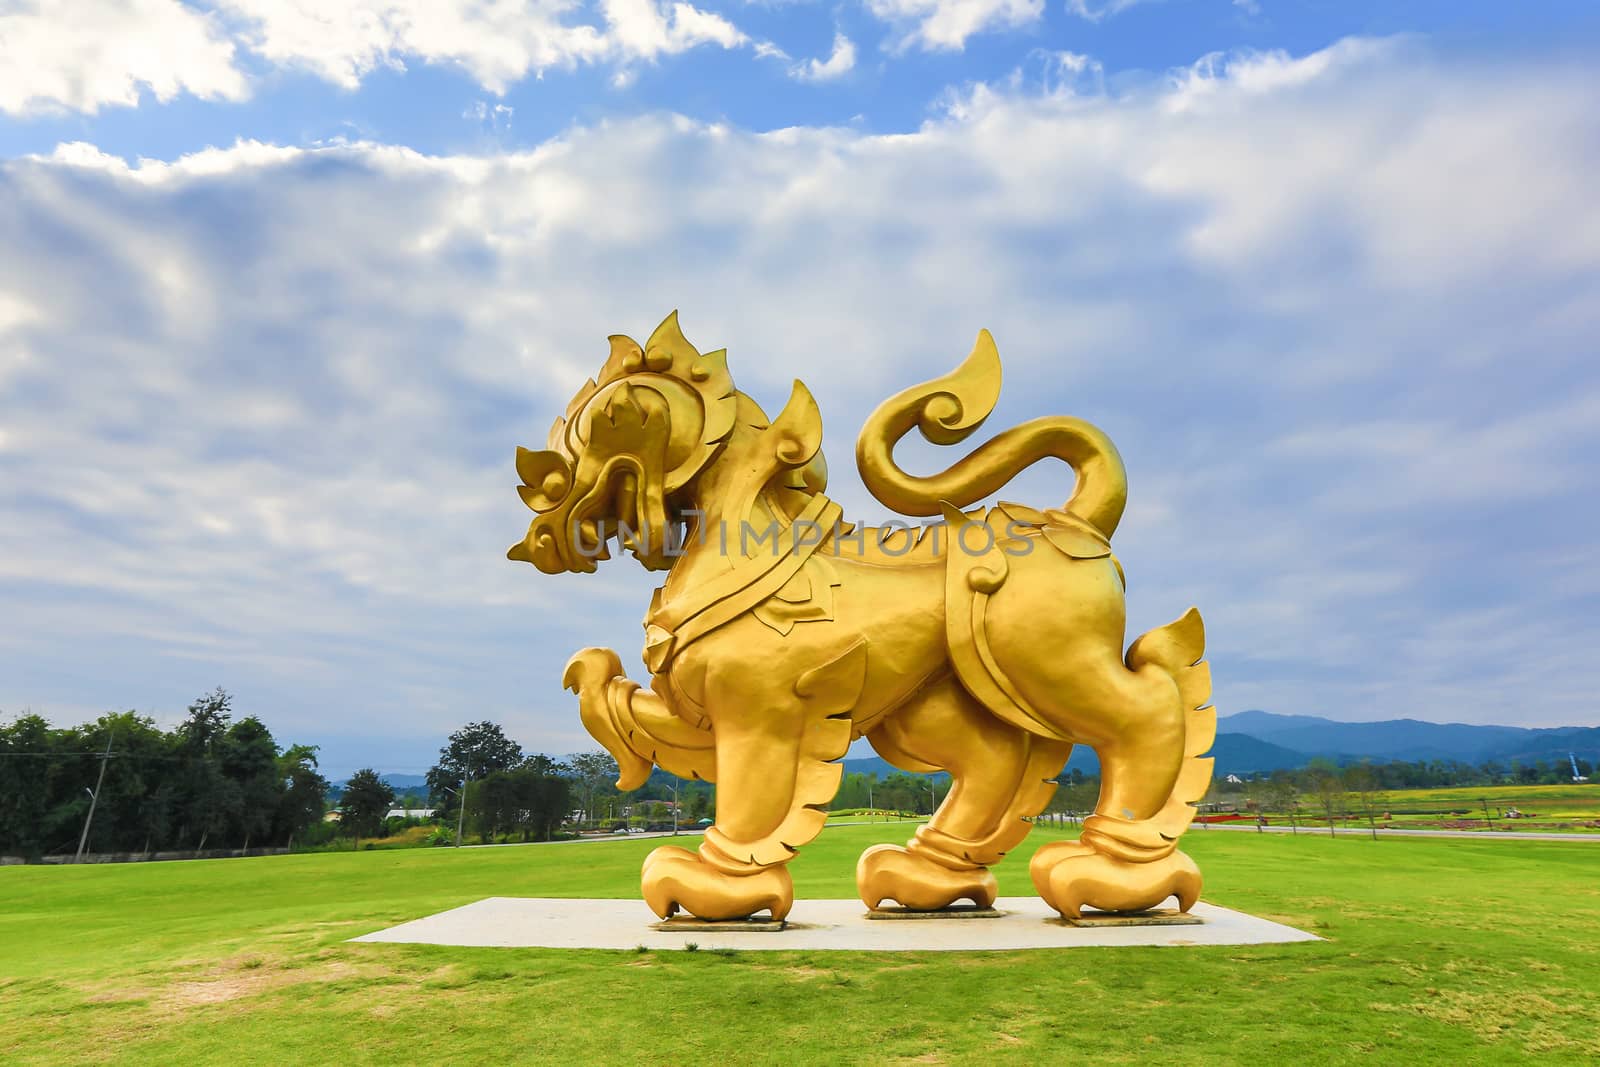 Gold lion statue sacred beliefs of Buddhists in Thailand.